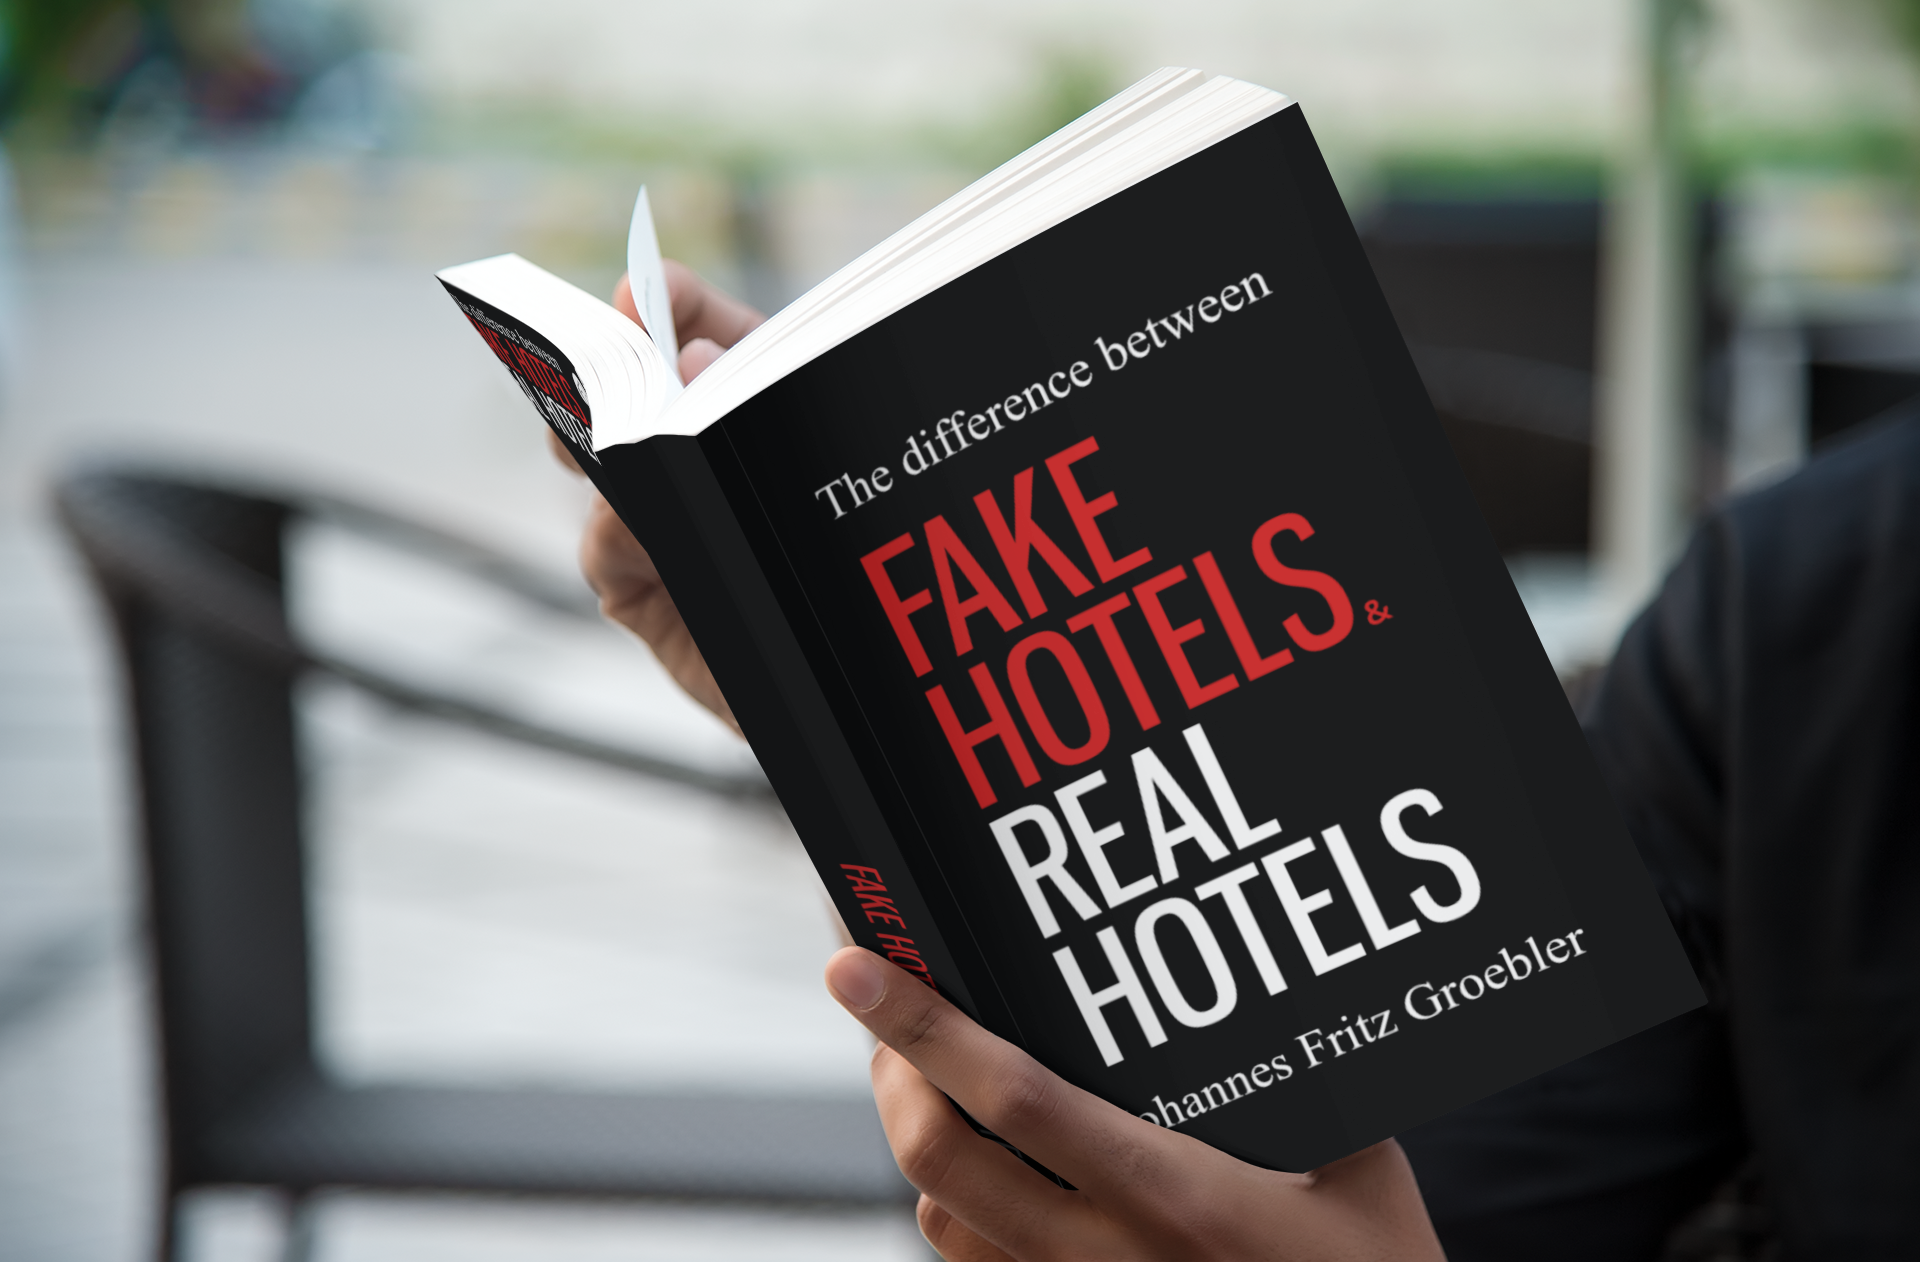 Neues Buch „FAKE HOTELS vs REAL HOTELS“